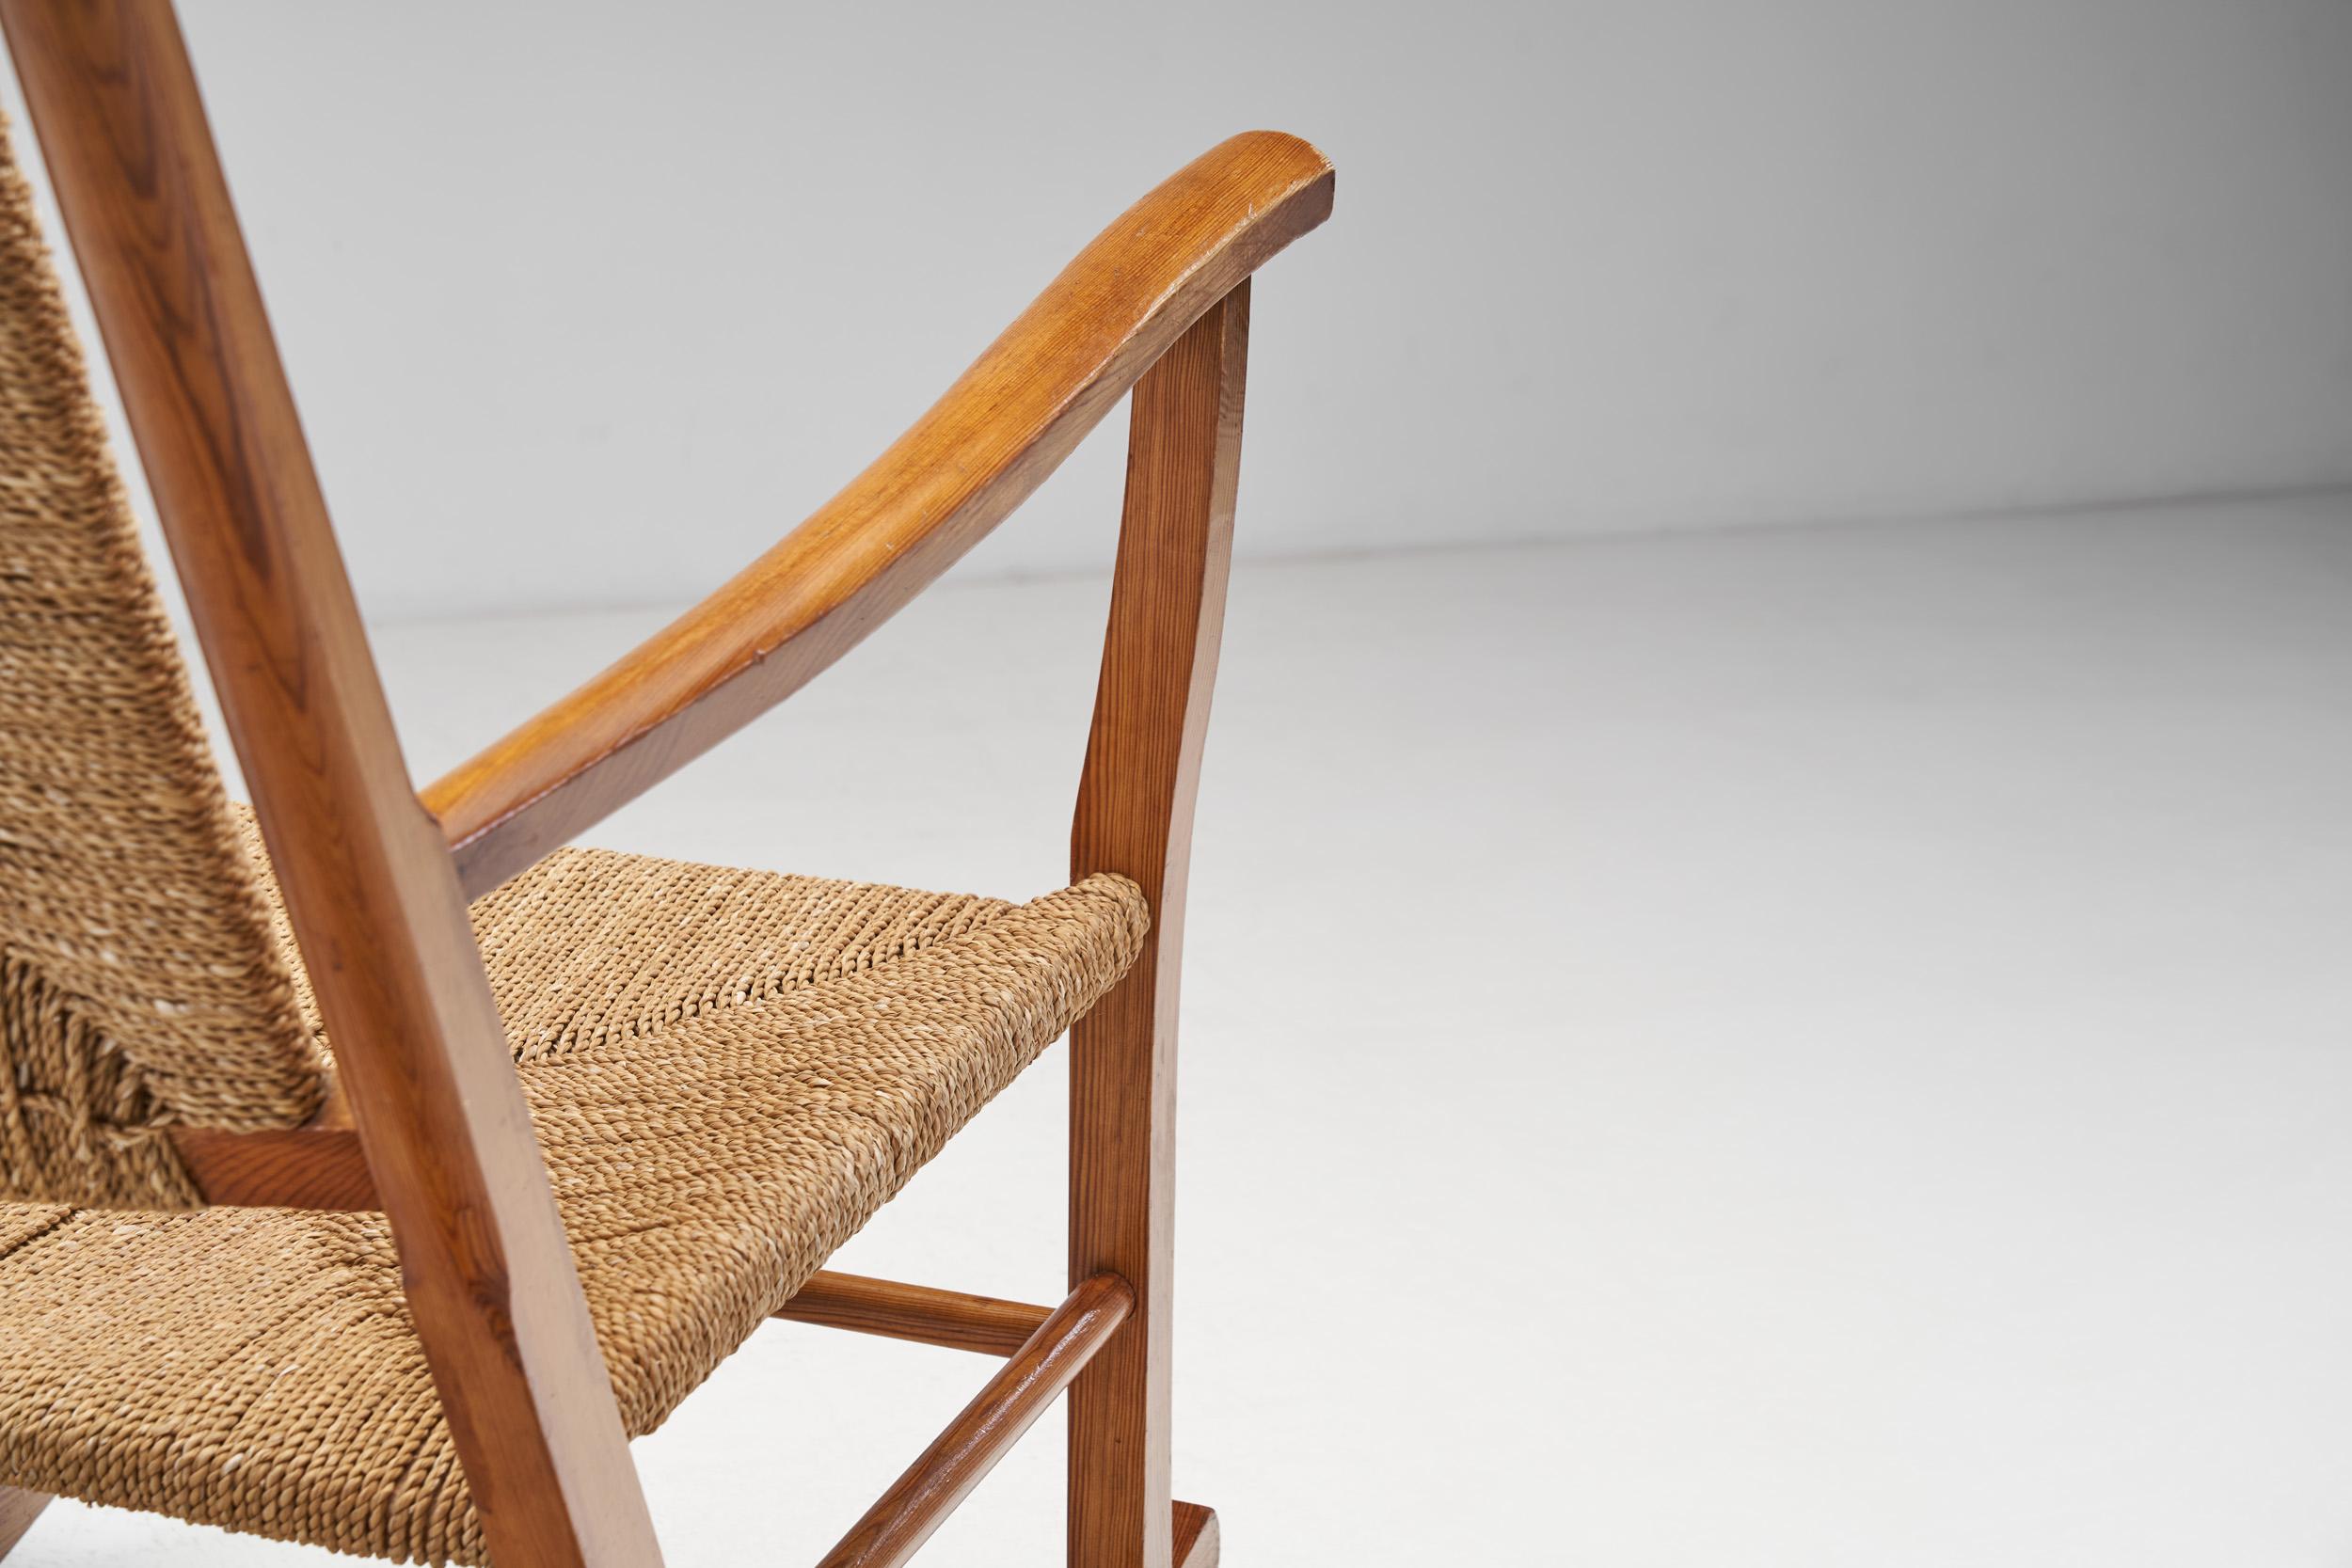 Norwegian Wood and Papercord Rocking Chairs by Slåke Møbelfabrikk, Norway 1940s For Sale 3